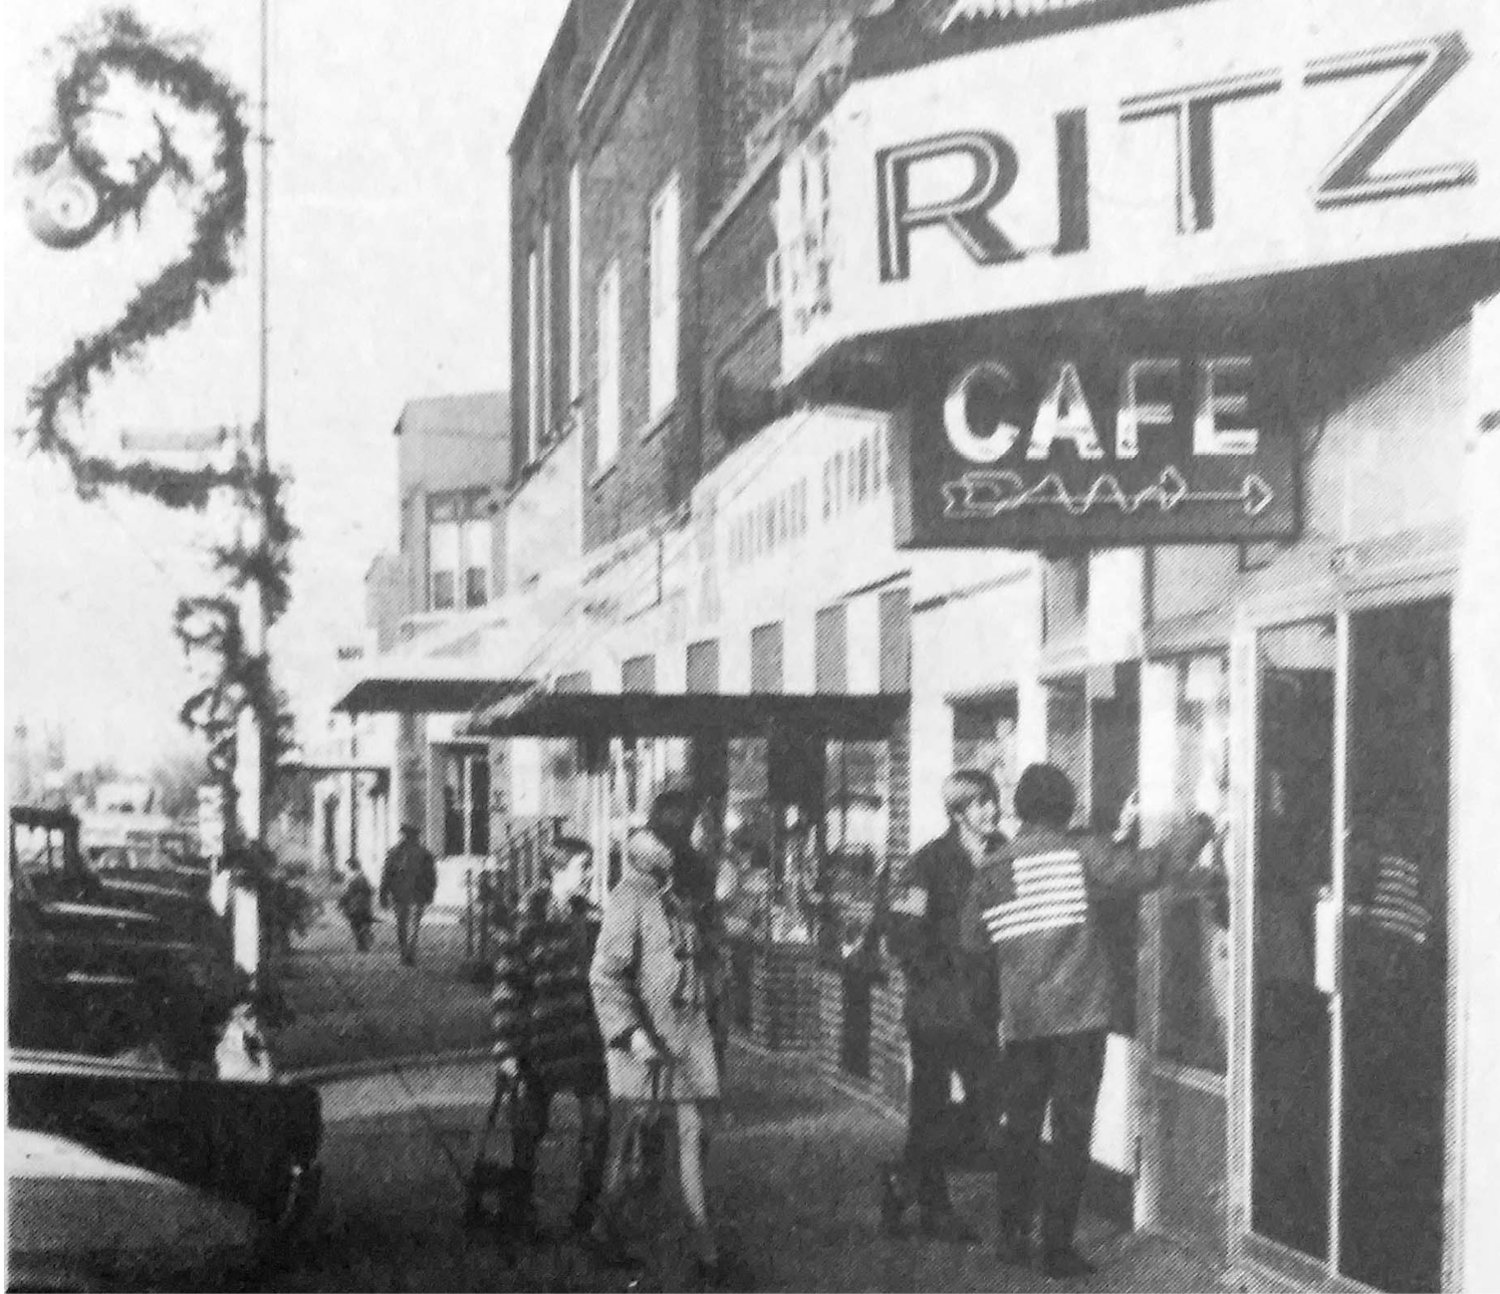 FIFTY YEARS AGO: All dressed up for the holiday season is De Smet, with the light poles in the business area attractive with the treble clef designs and the new decorations. John Colwell, Louis Lee and others braved a cold high wind last week to mount the ornamentation on light poles in the business area.